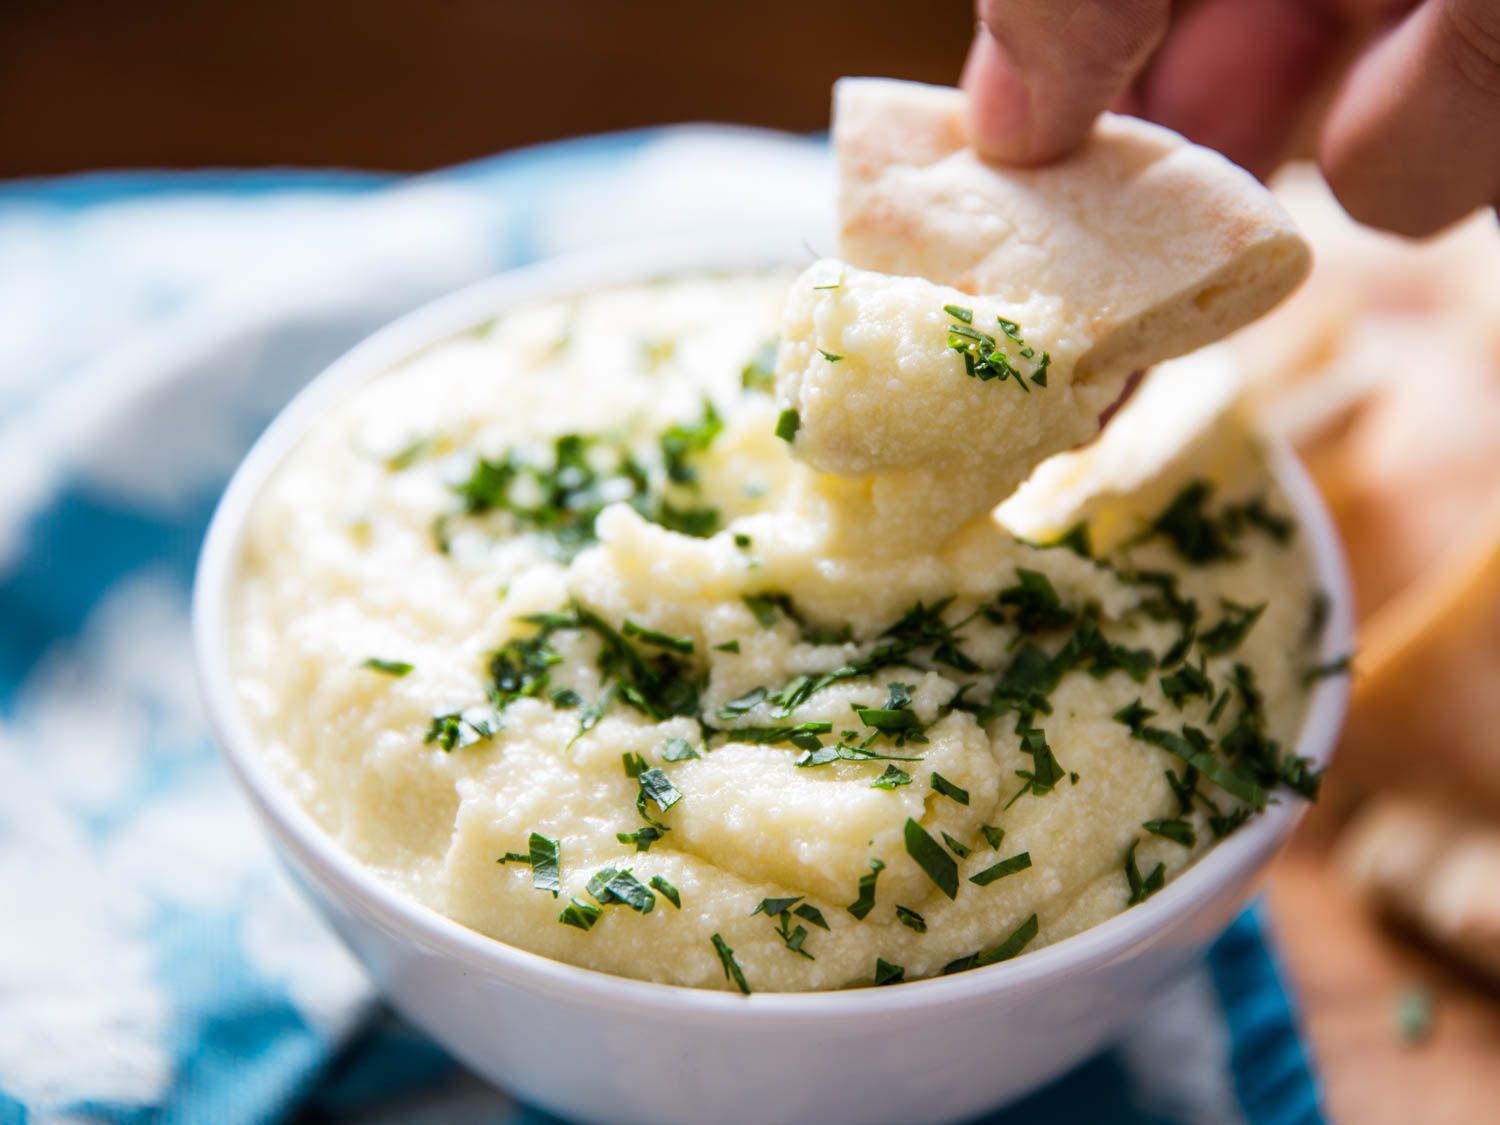 Hand holding pita slice that's being dipped into small bowl of potato puree topped with herbs.